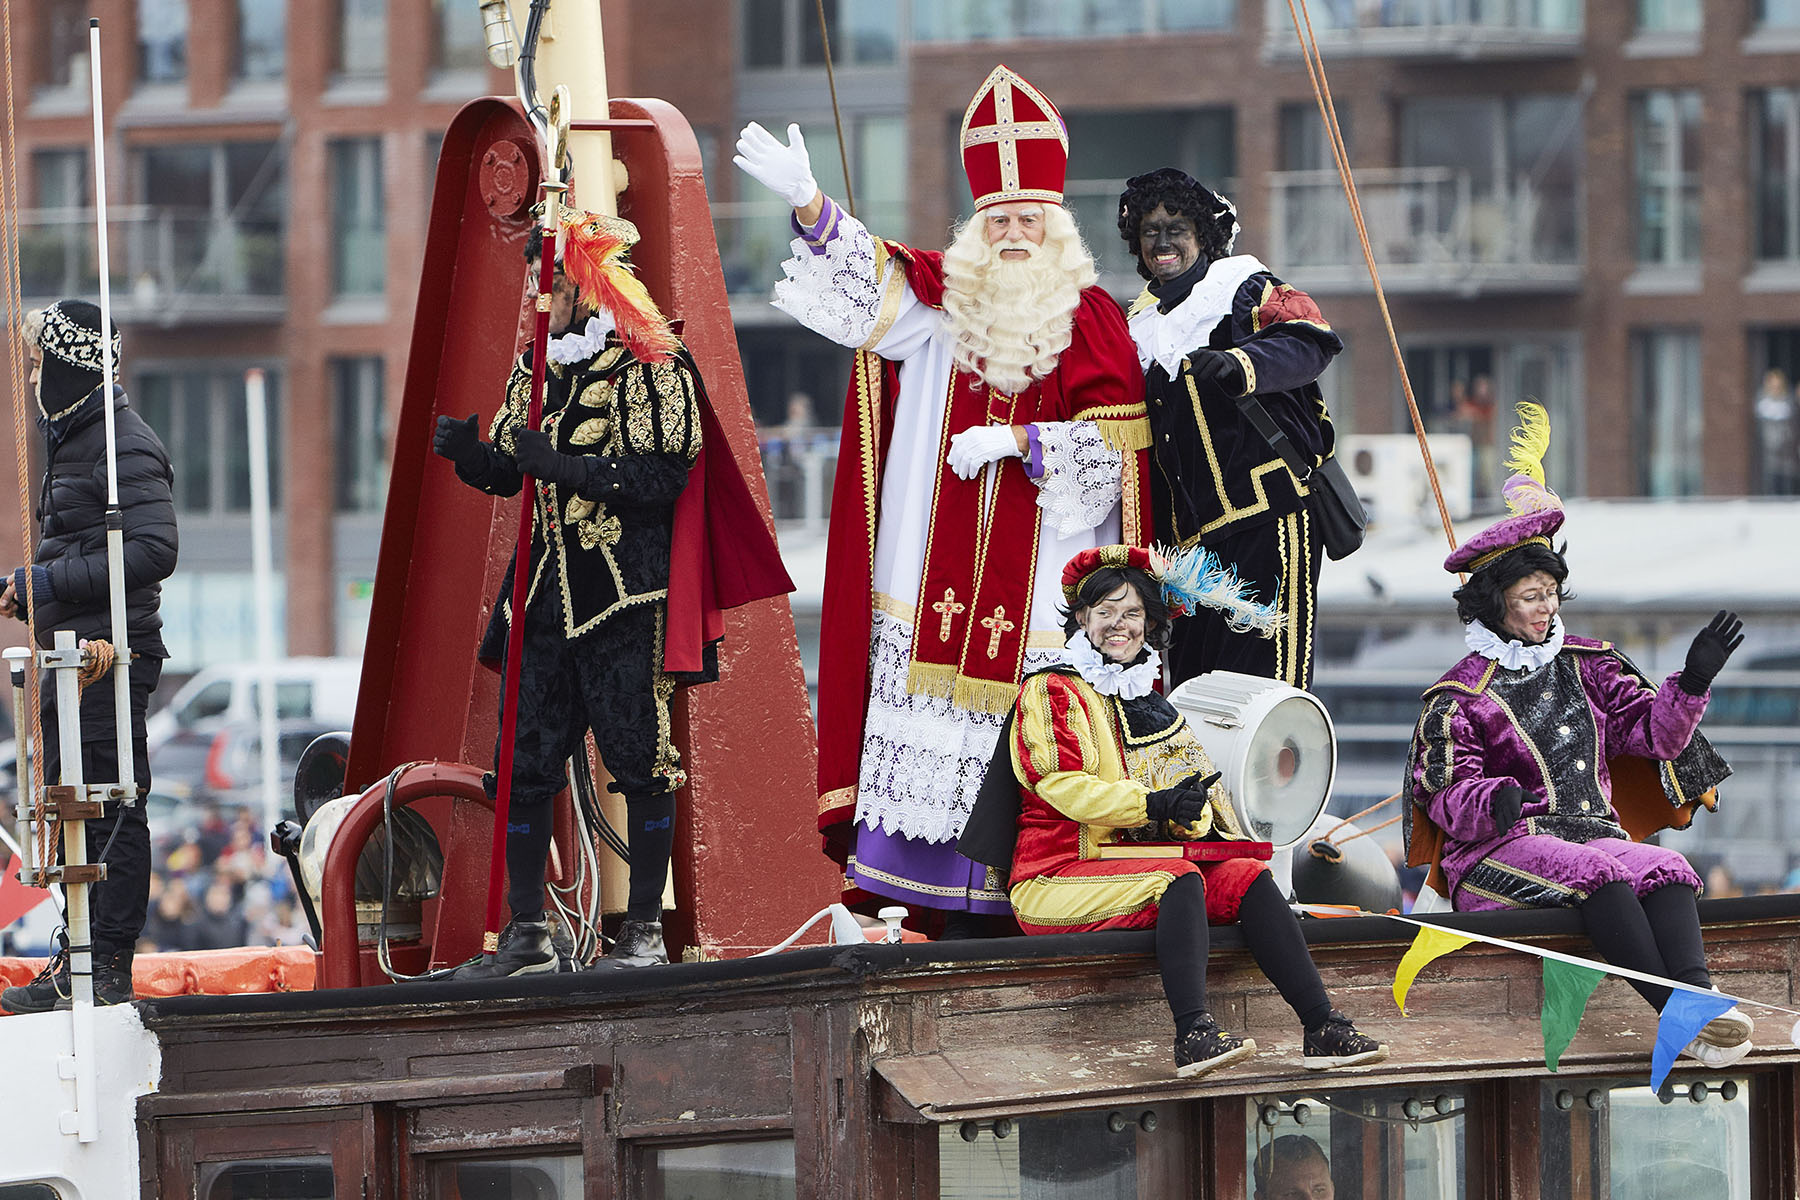 Sinterklaas and a couple of Sooty Petes are standing on top of the steam boat waving to the people down on the quay.